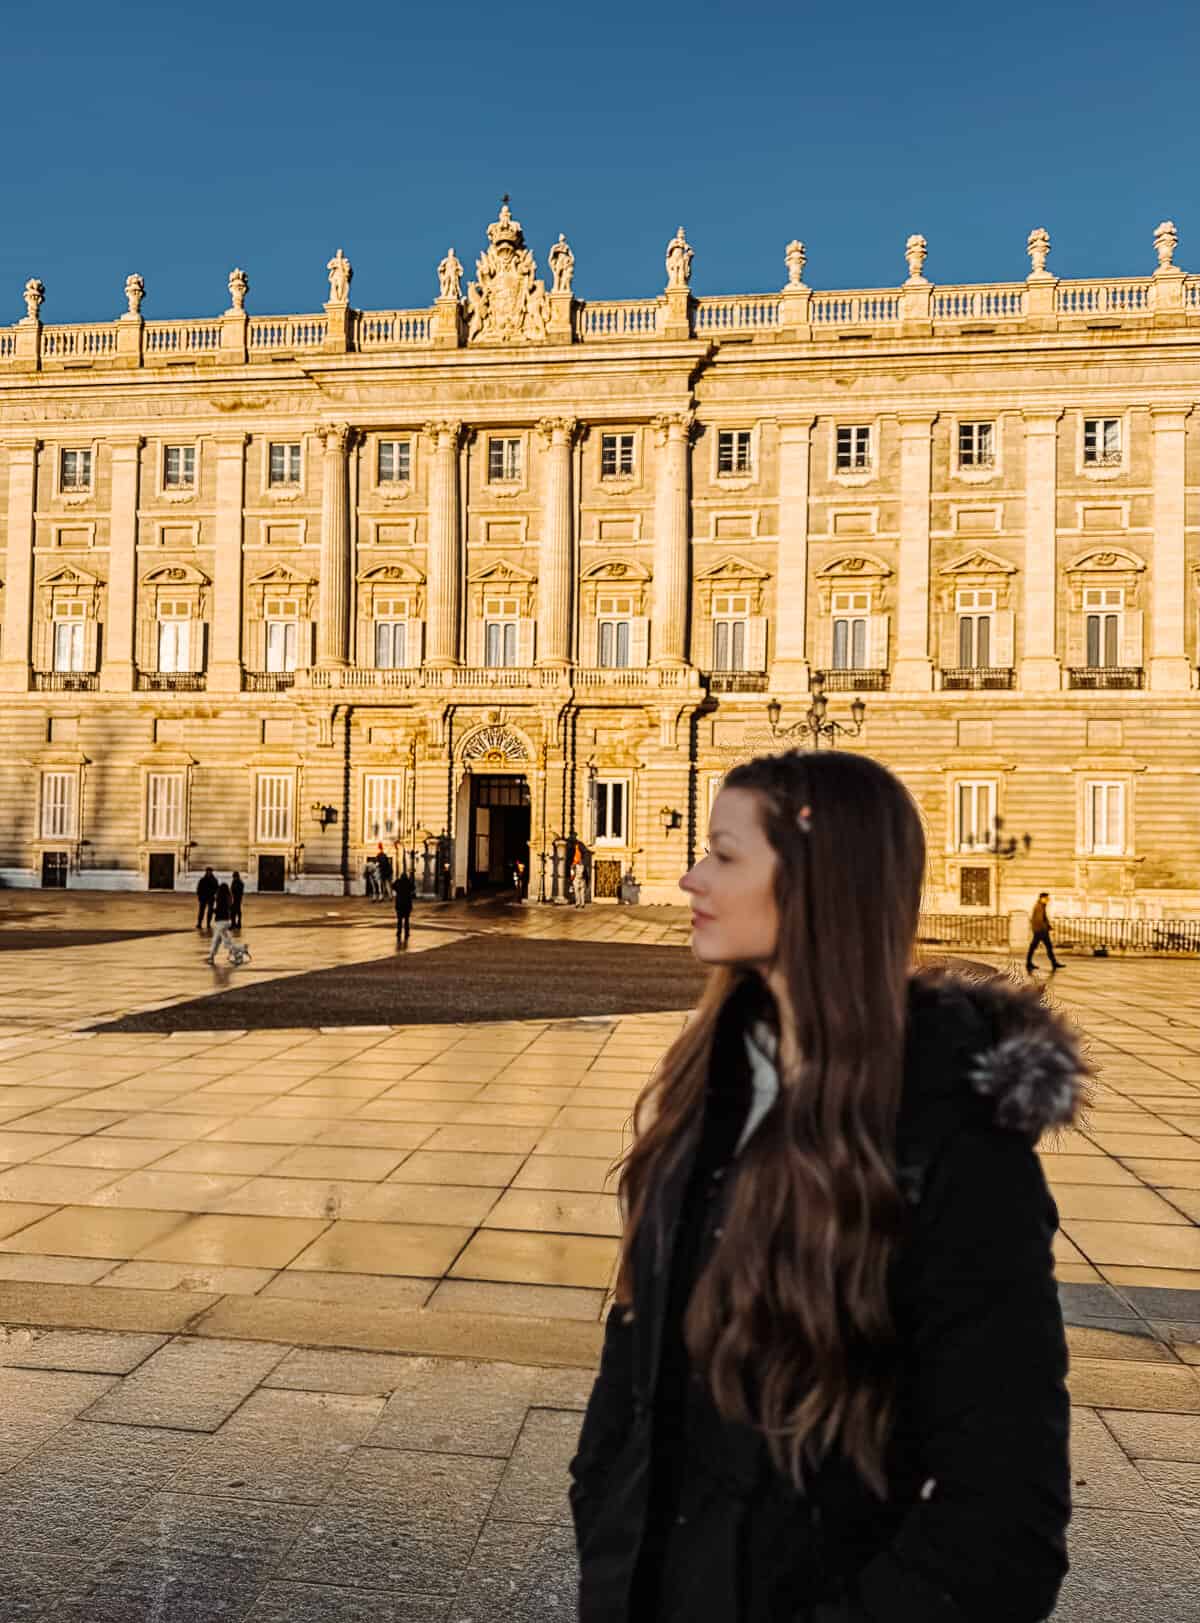 A woman in a black coat with long hair stands in the foreground, slightly out of focus, with the majestic Royal Palace of Madrid illuminated by the golden light of the setting sun in the background.